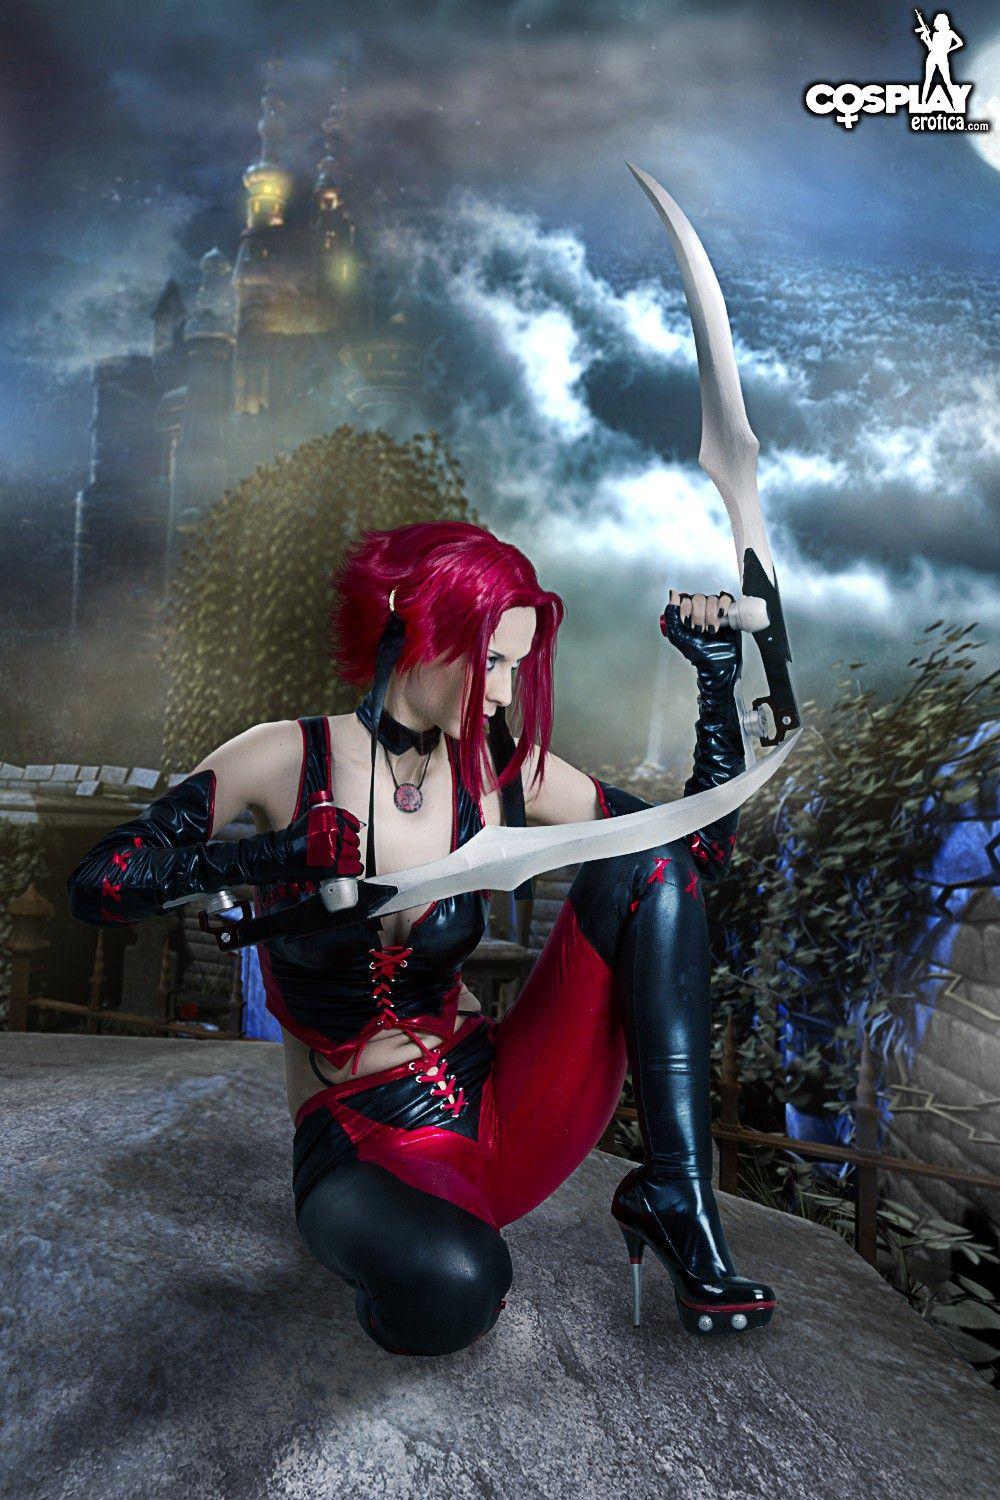 Pictures of sexy cosplayer Lana dressed as Bloodrayne #58815168